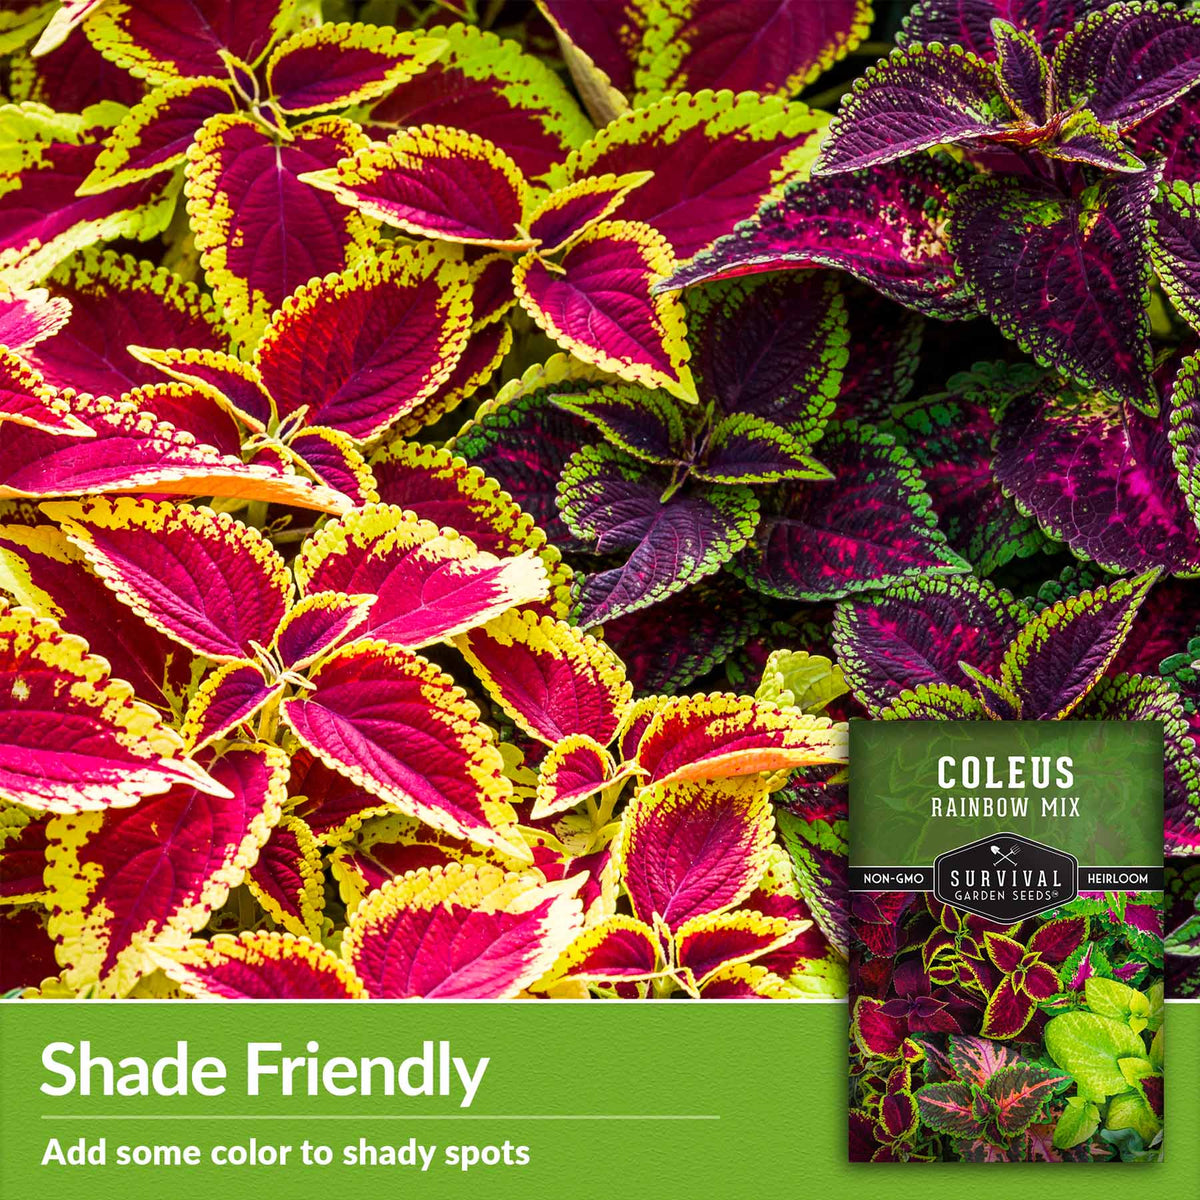 Shade friendly - add some color to shady spots